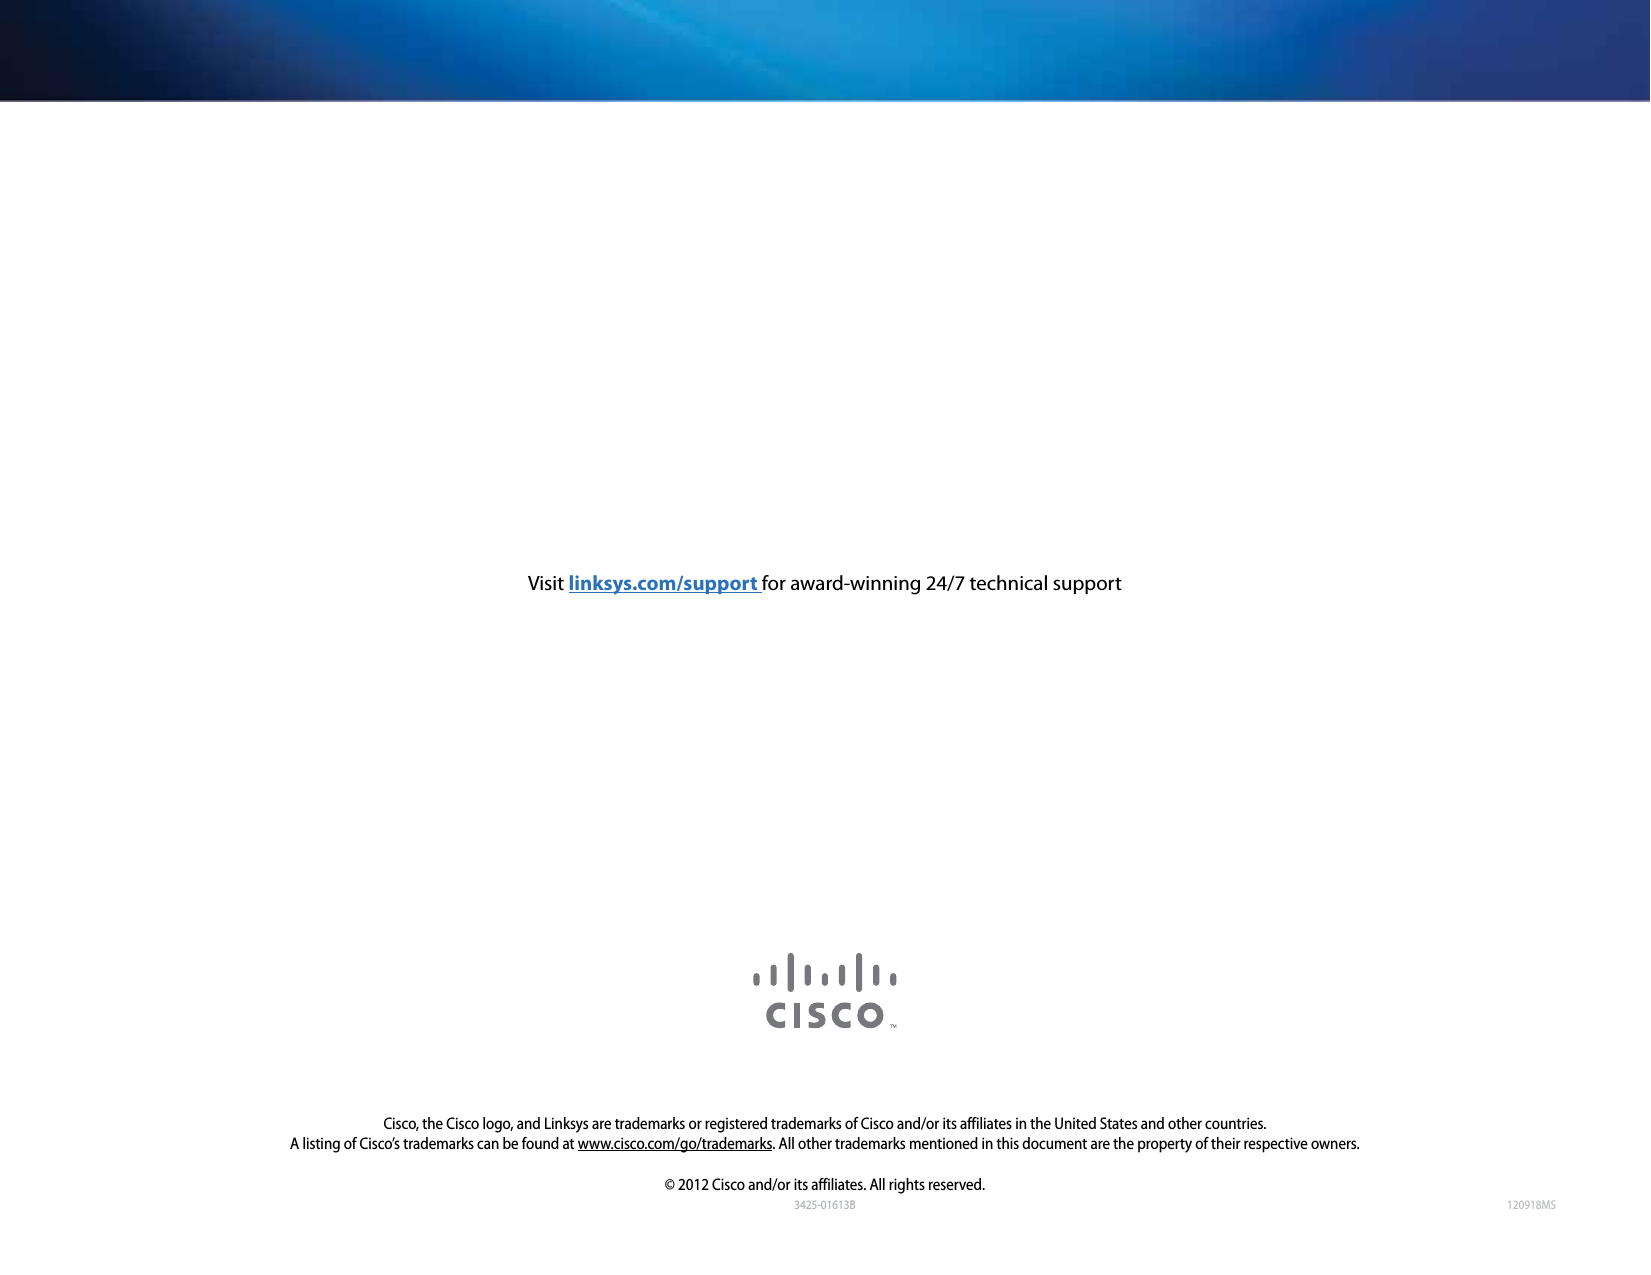 120918MSCisco, the Cisco logo, and Linksys are trademarks or registered trademarks of Cisco and/or its affiliates in the United States and other countries. A listing of Cisco’s trademarks can be found at www.cisco.com/go/trademarks. All other trademarks mentioned in this document are the property of their respective owners.© 2012 Cisco and/or its affiliates. All rights reserved.Visit linksys.com/support for award-winning 24/7 technical support3425-01613B